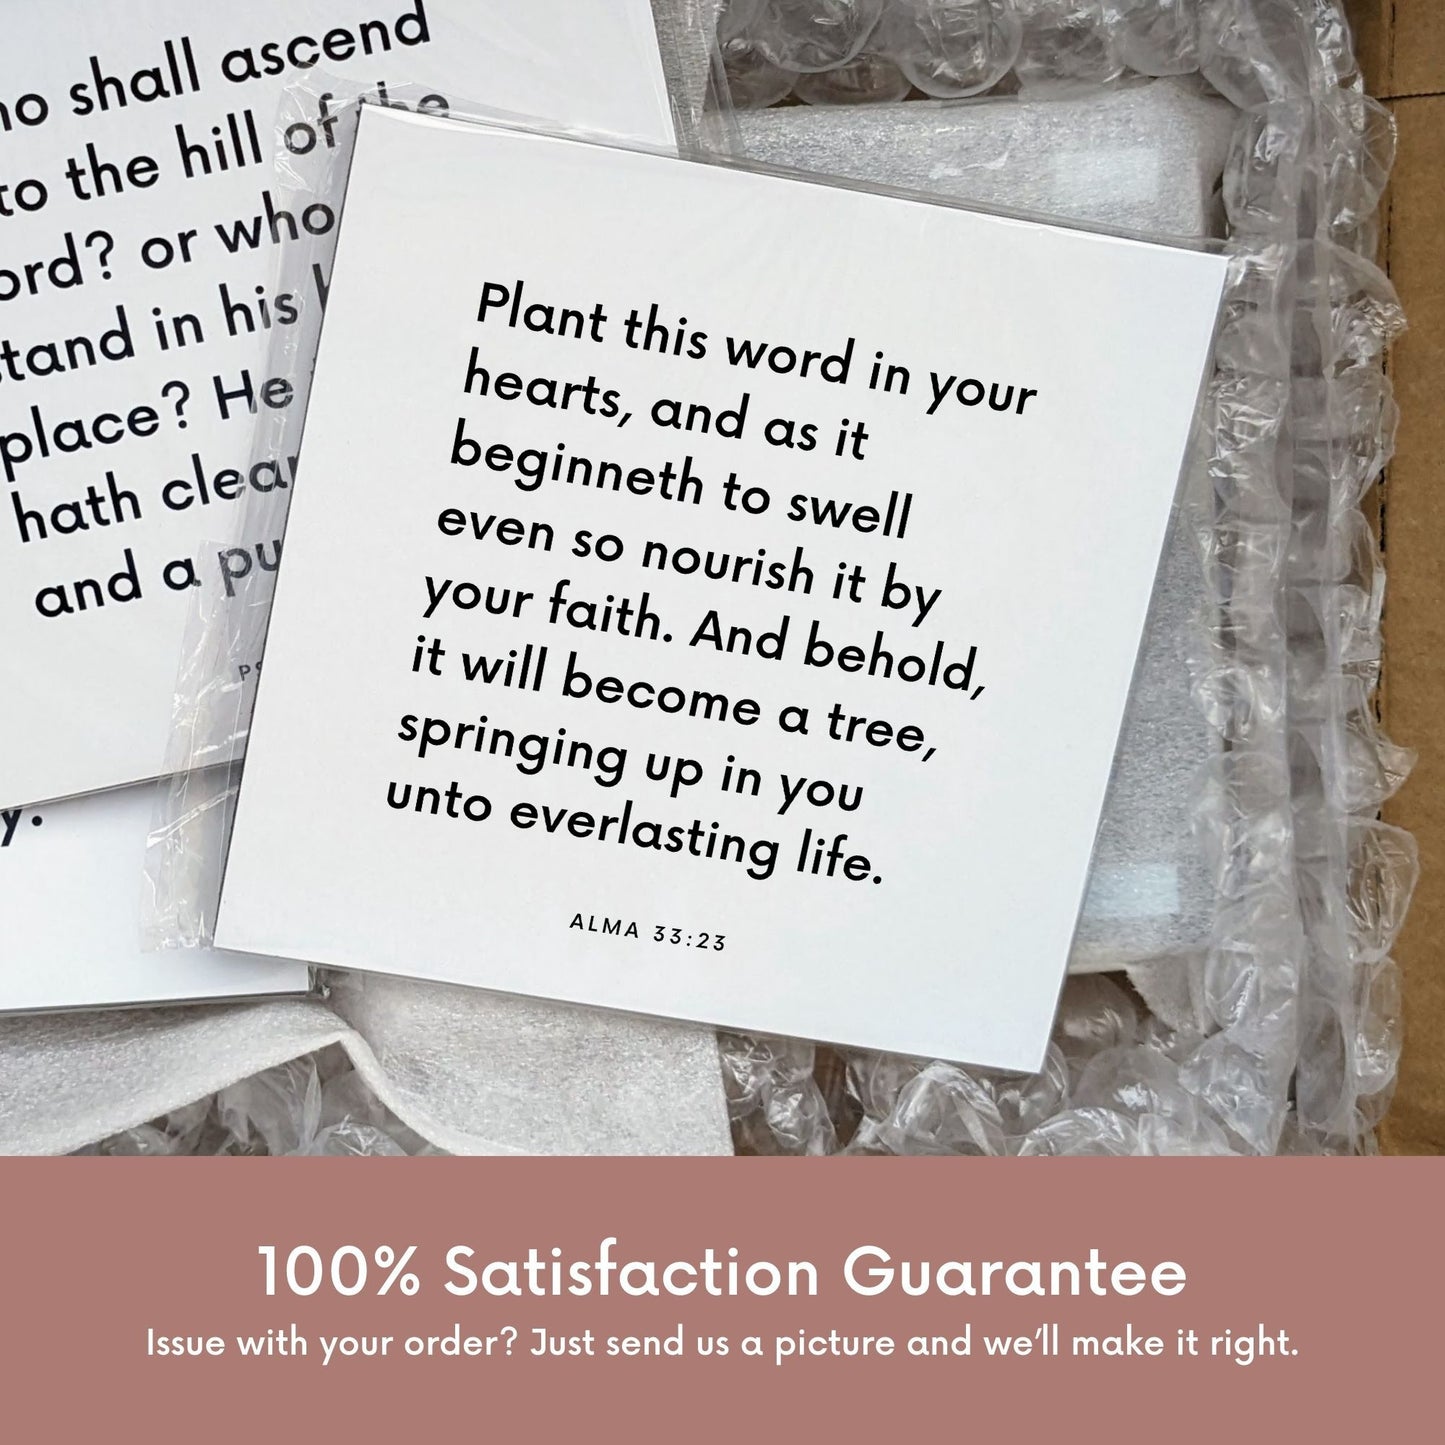 Shipping materials for scripture tile of Alma 33:23 - "Plant this word in your hearts"